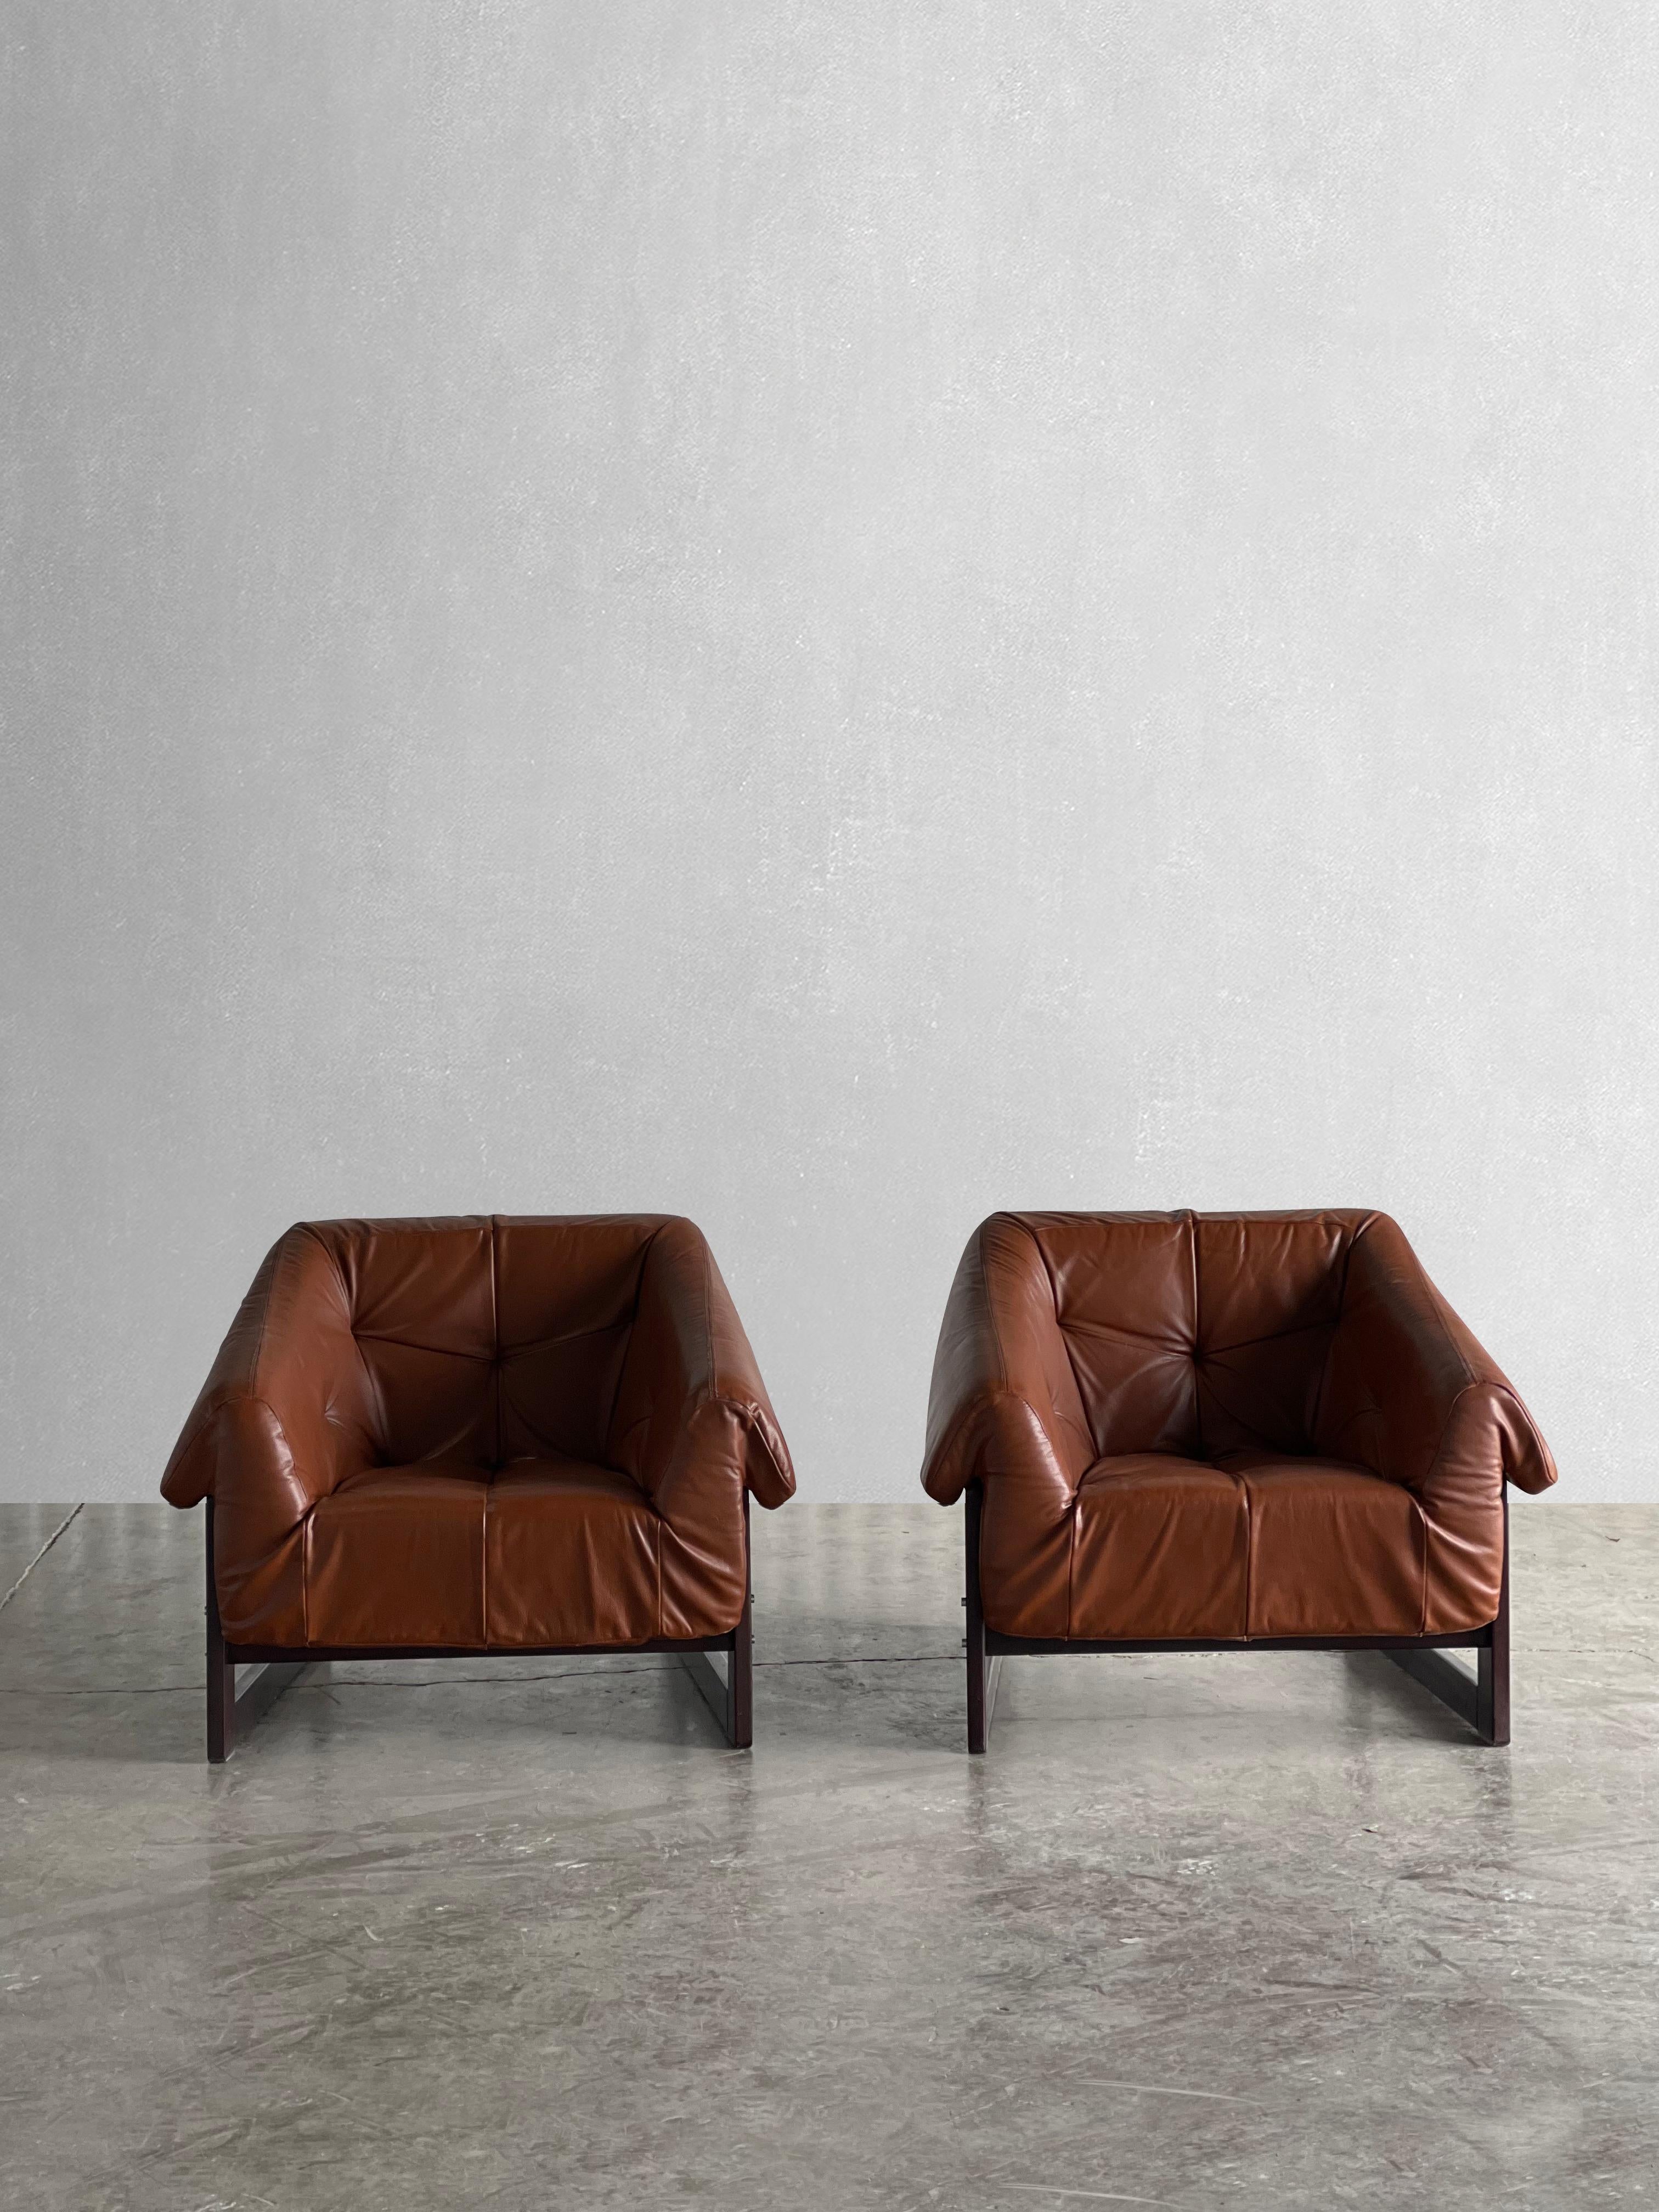 circa 1970s

Percival Lafer was one of the most prolific designers of the Brazilian midcentury period.

The tufted cognac leather cushion sits on sturdy leather straps, which are attached to the jacaranda rosewood frame with dowels.

The seat